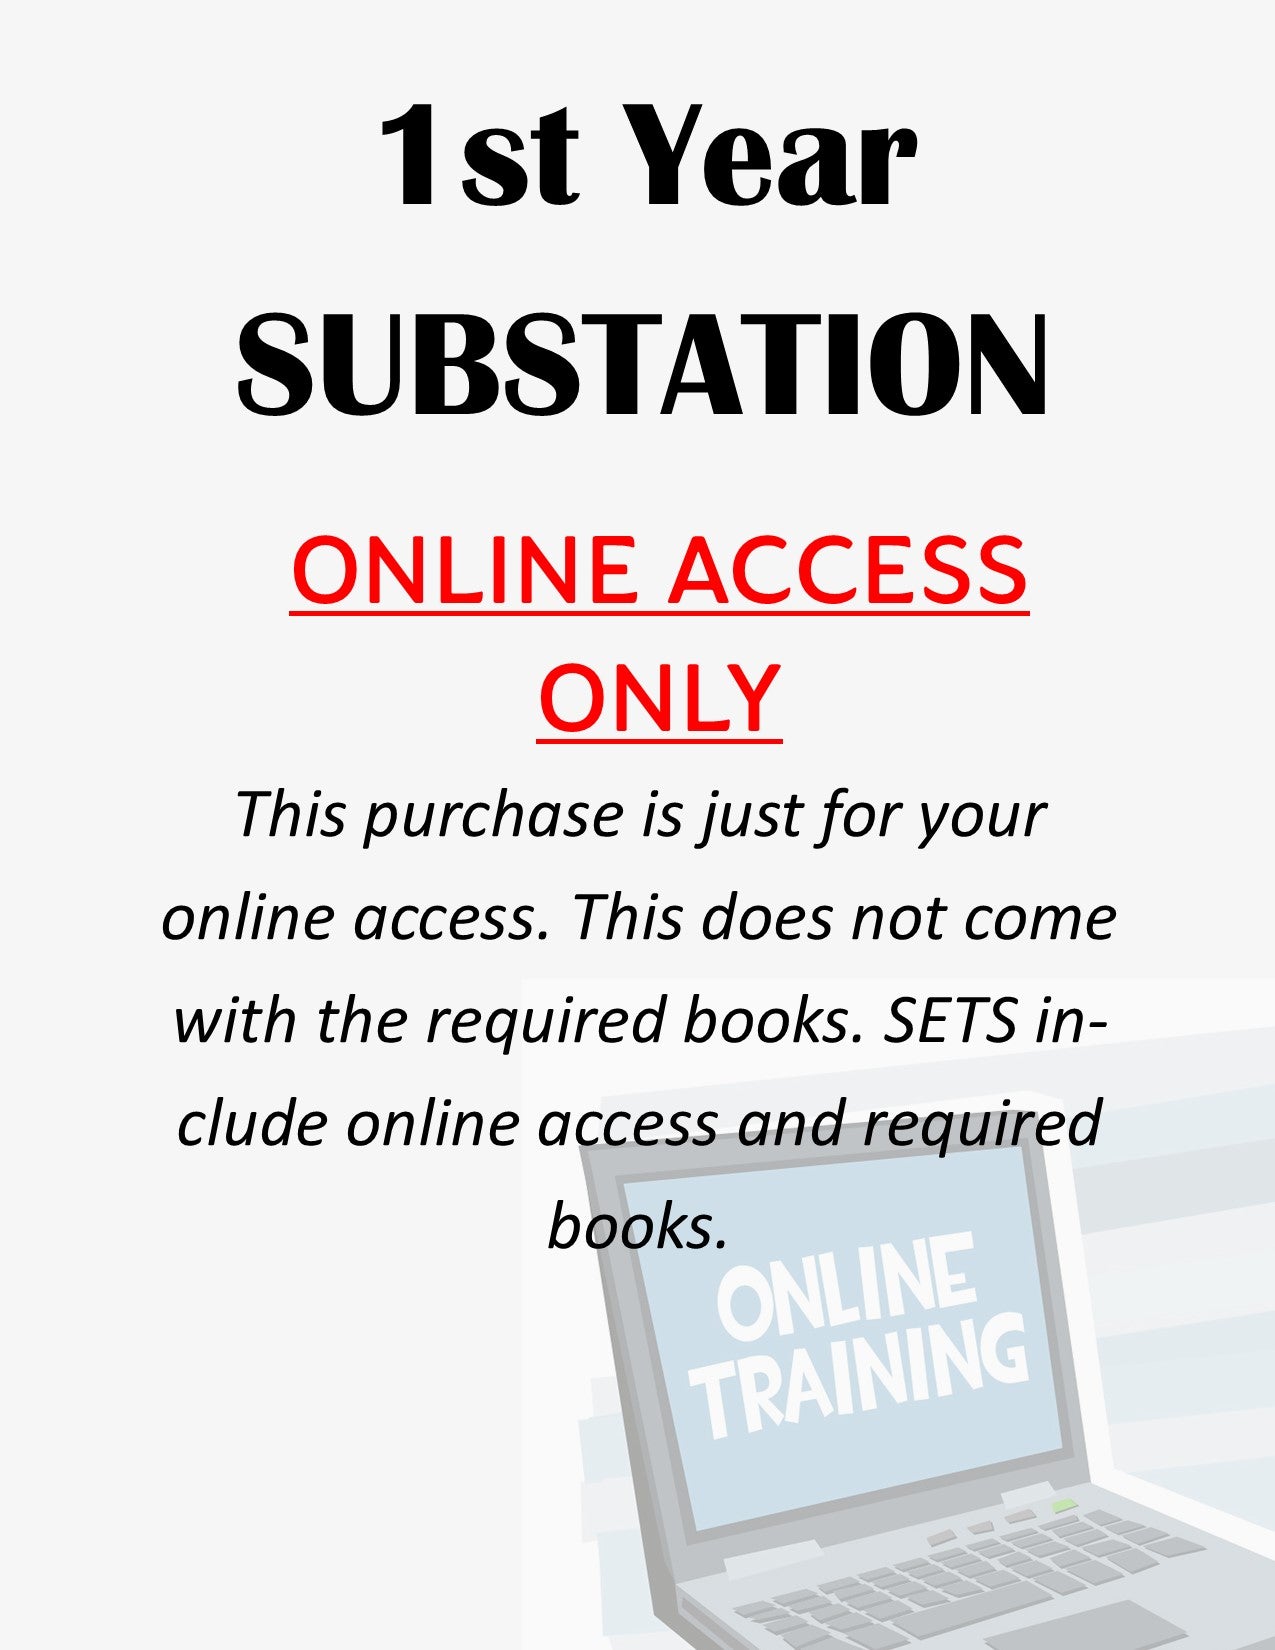 1st Year Substation Online Access ONLY